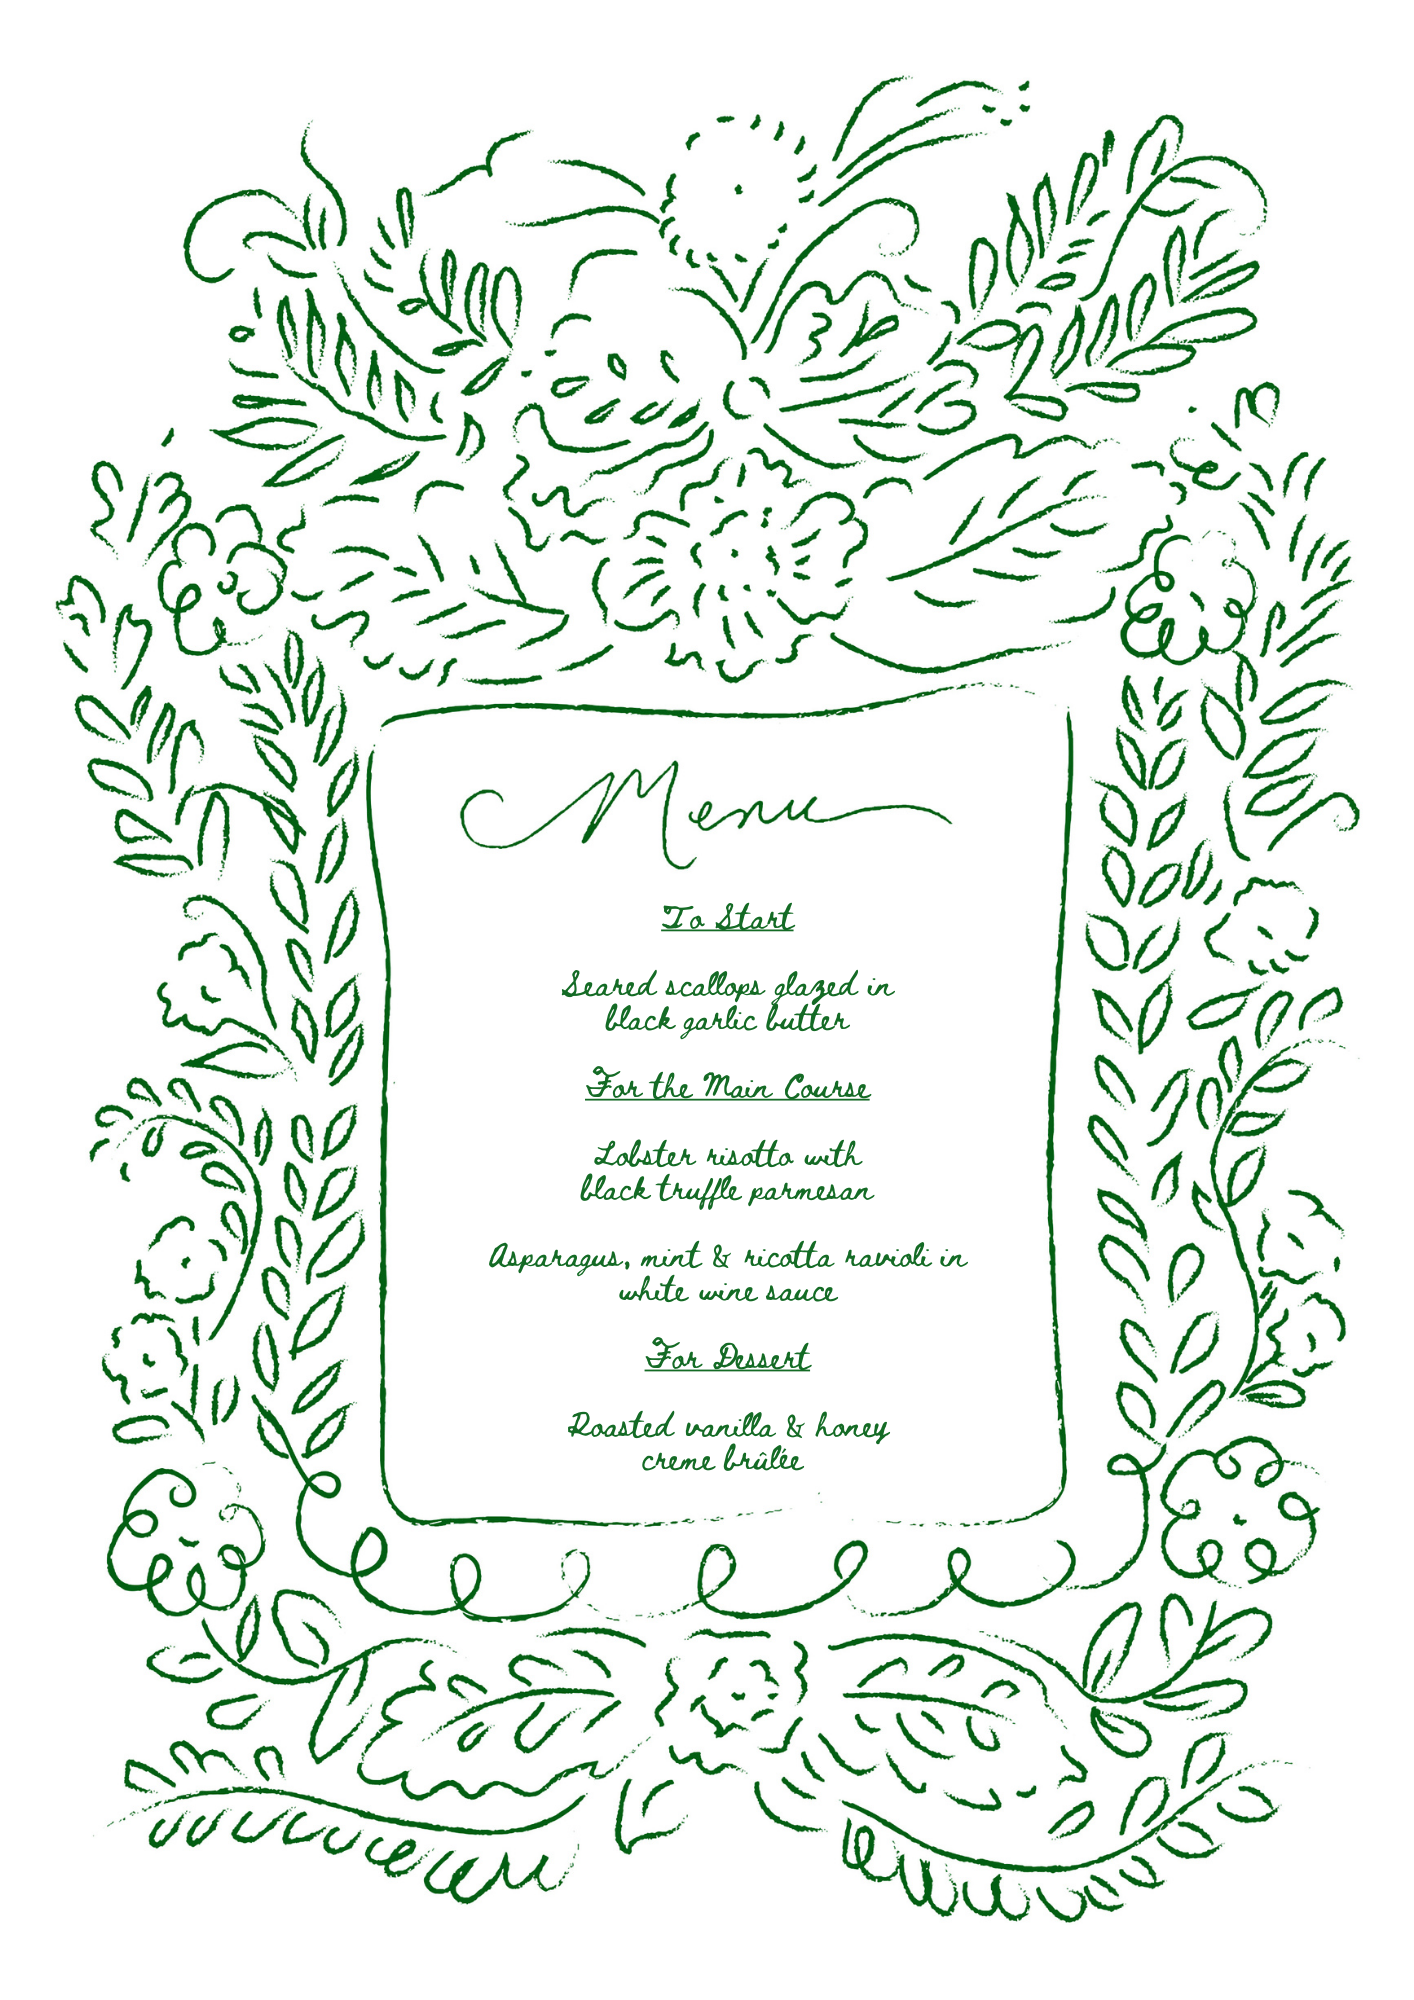 Dinner With Friends Floral Frame border Menu Template.png